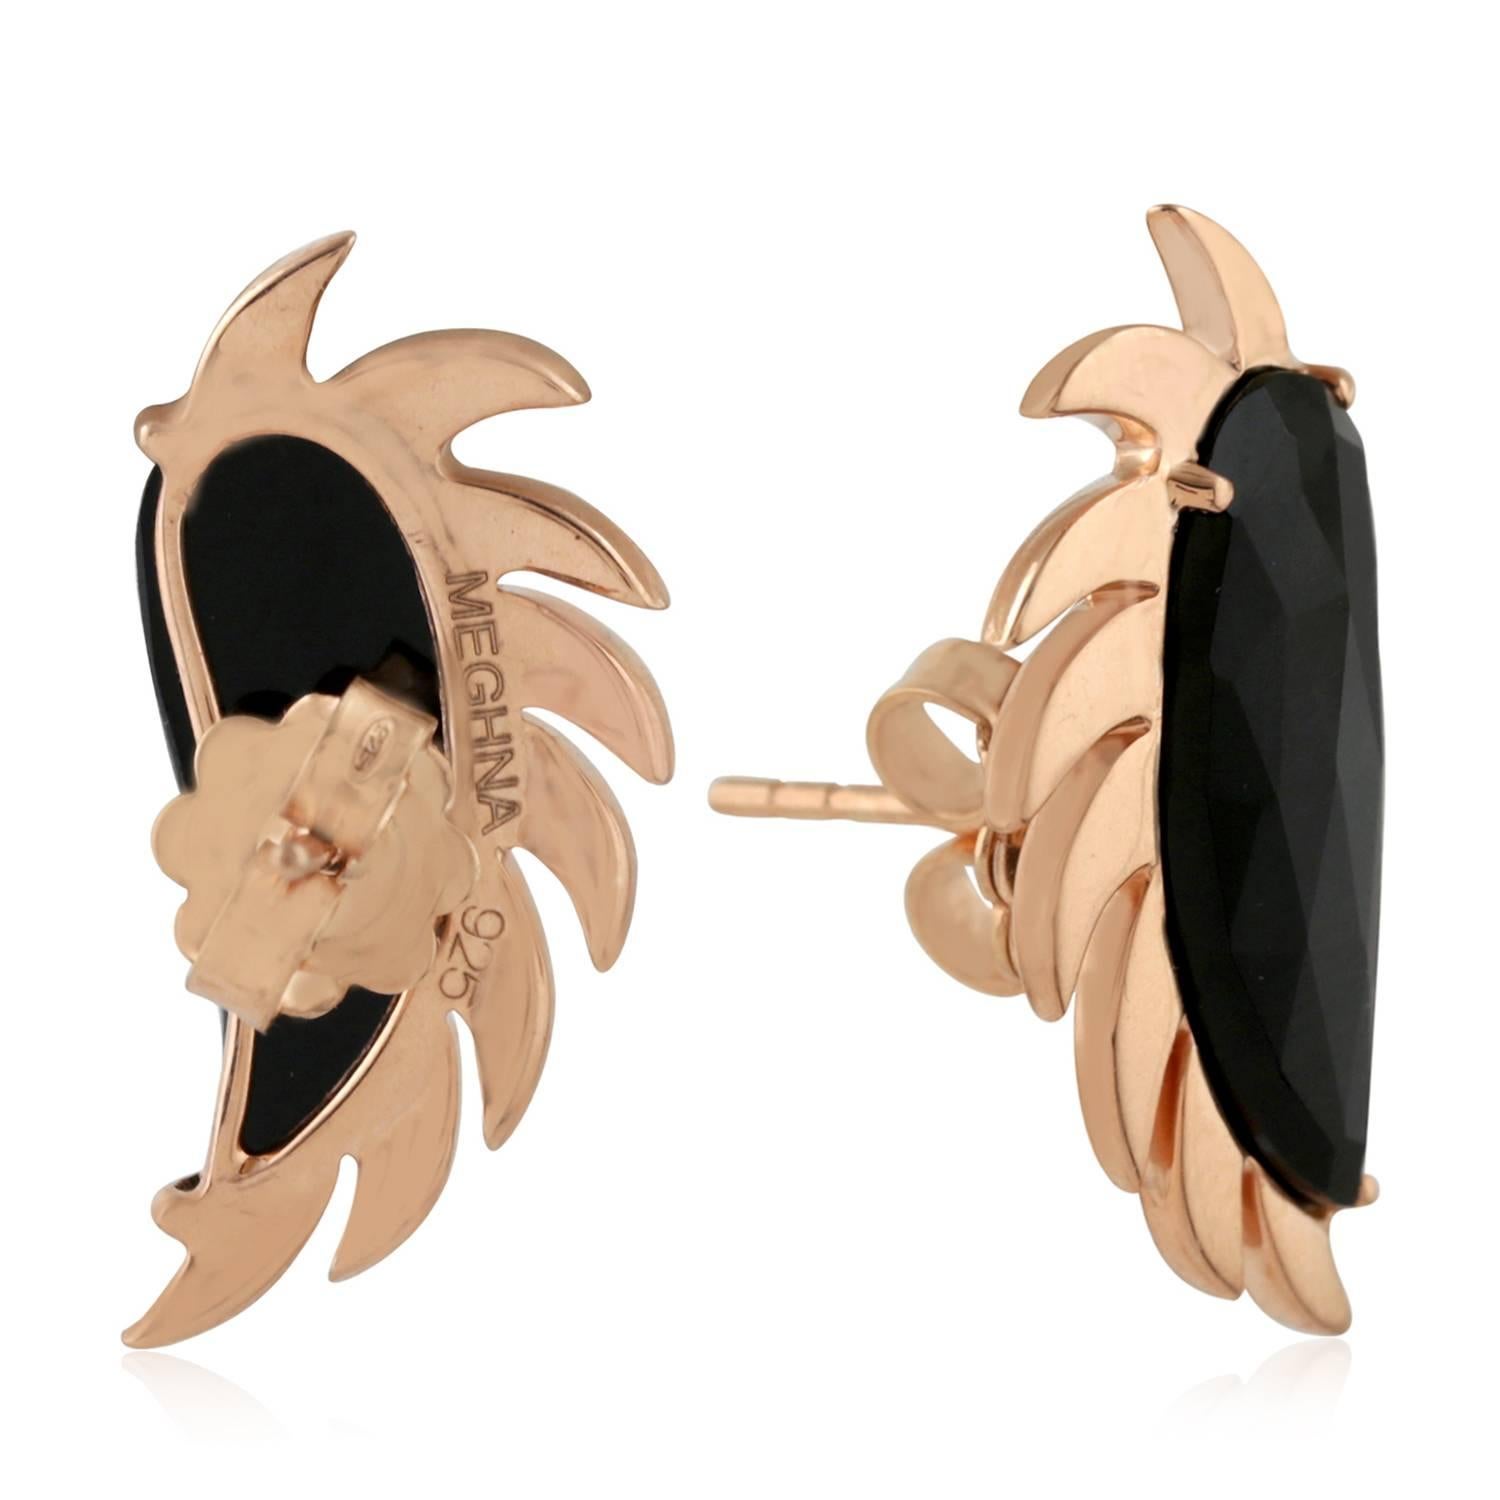 These distinctive stud earrings are modern twist to fine jewelry, handcrafted in 18K gold and sterling silver. The iridescent 16.0-ct rose cut black onyx is surrounded by 